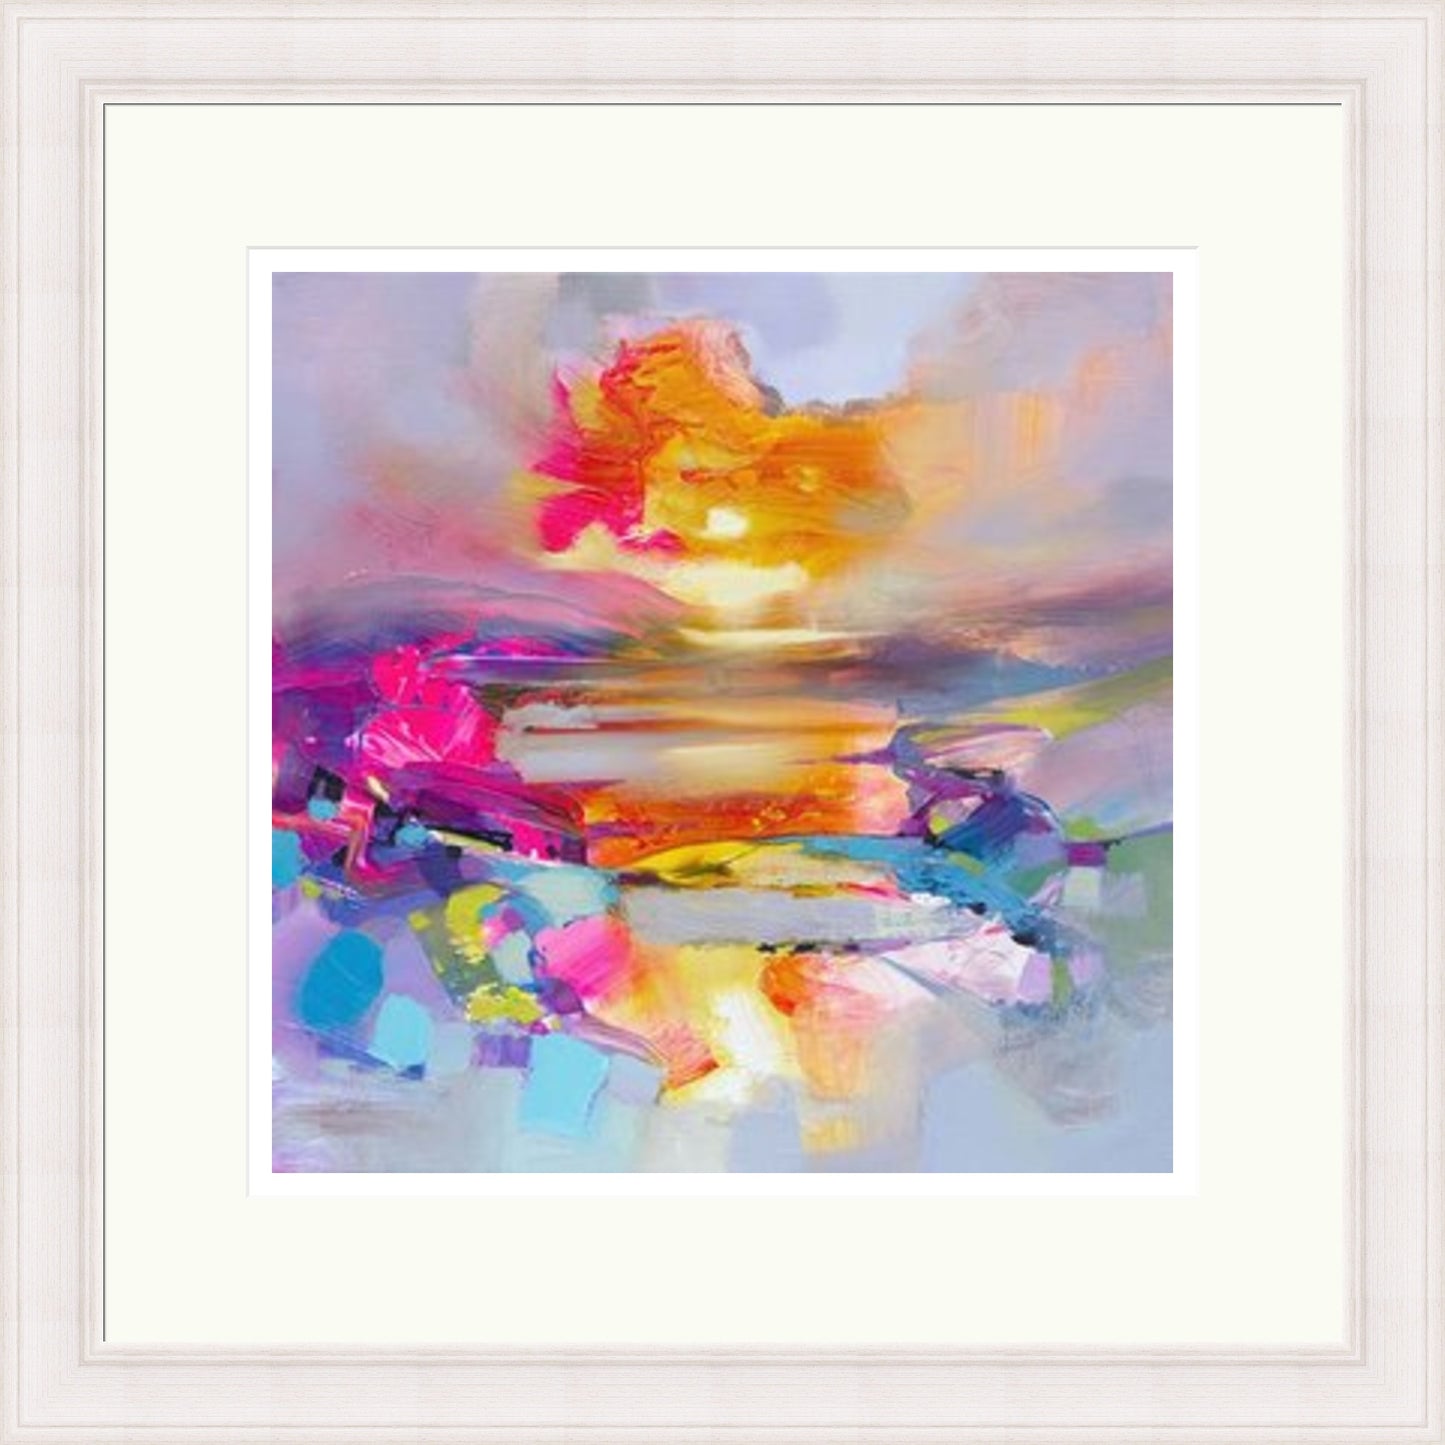 Colour Combustion (Limited Edition) by Scott Naismith